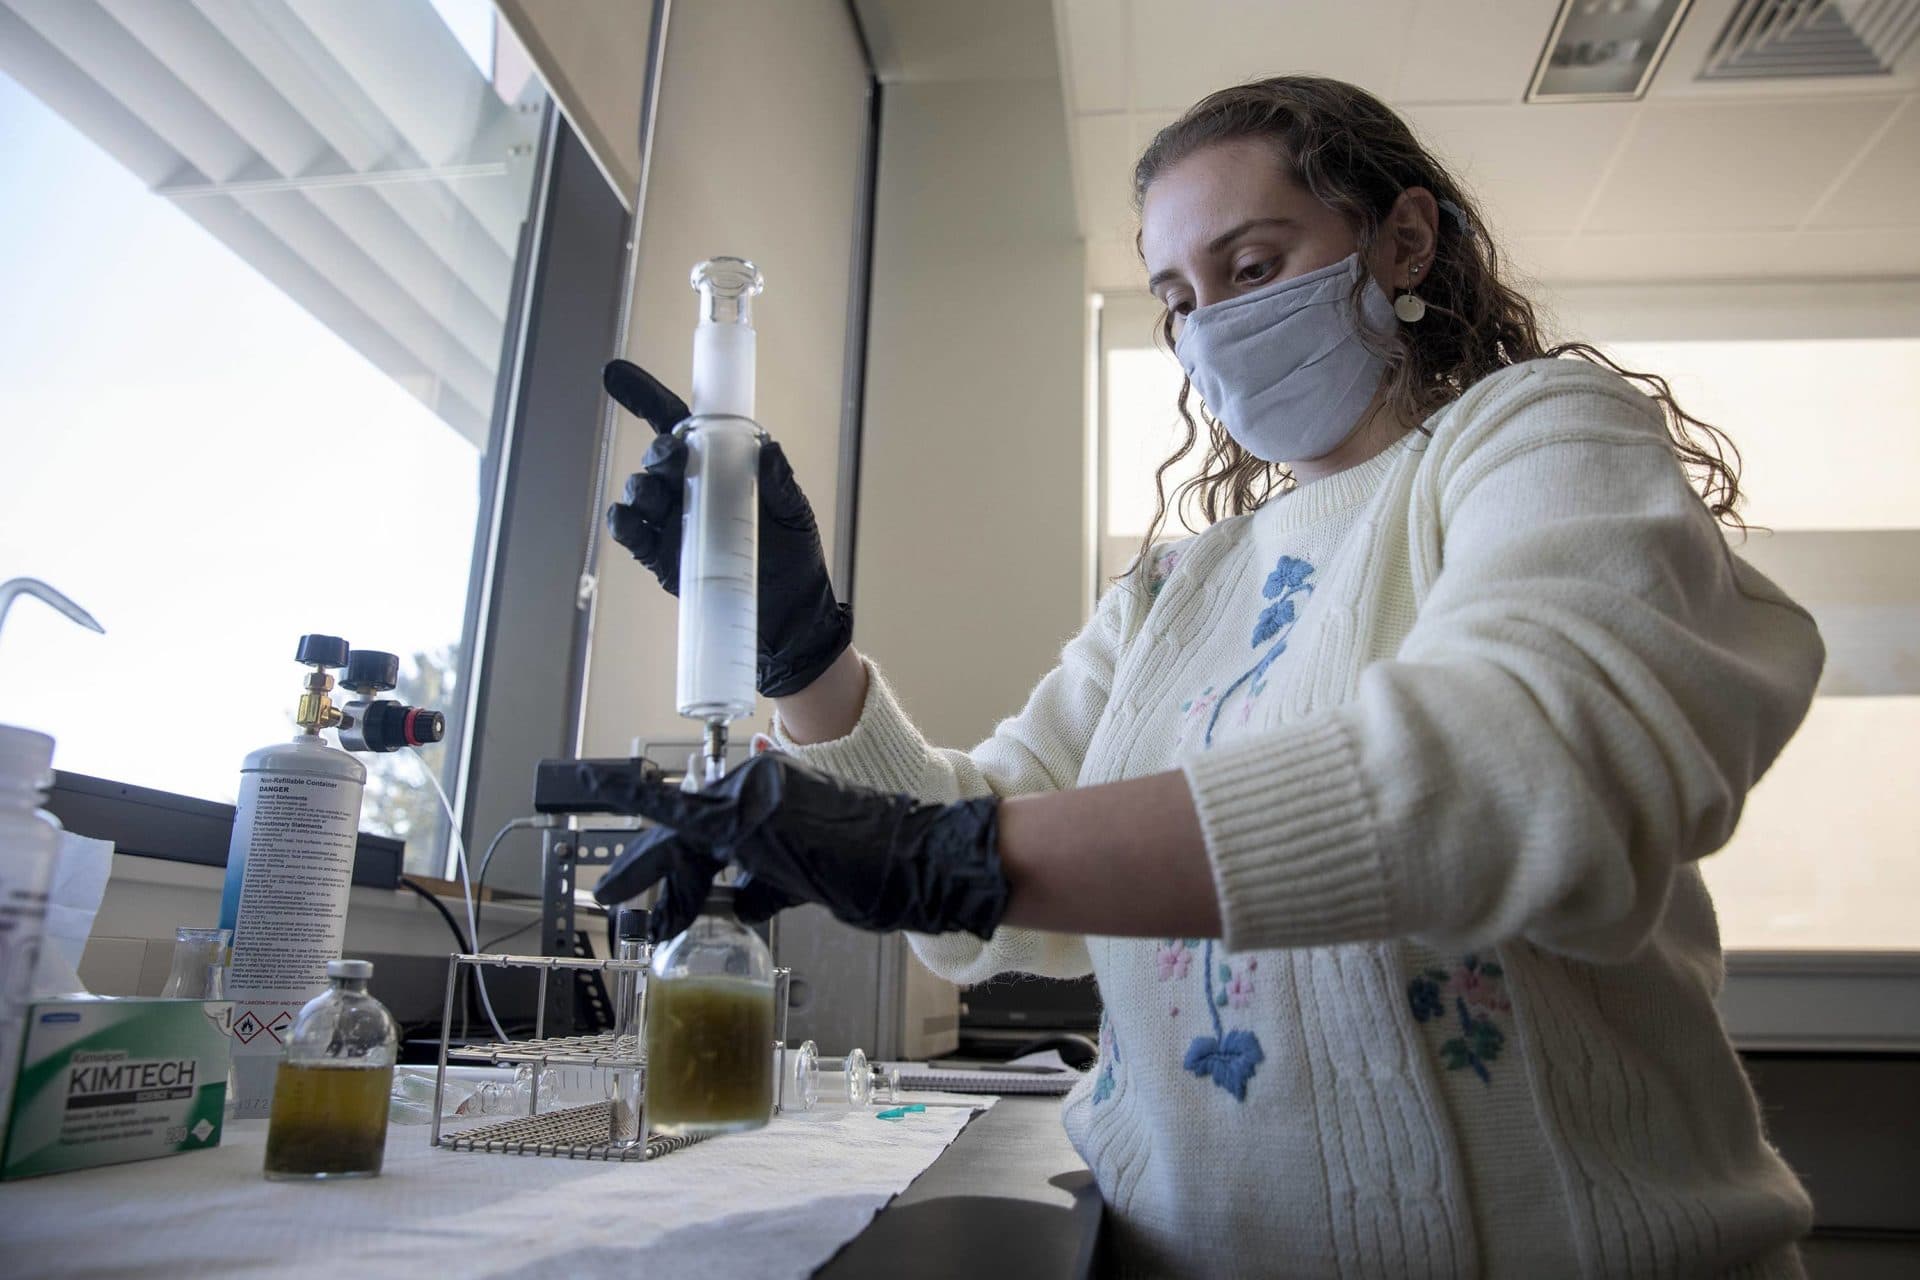 Research technician Gabriella Iacono demonstrates how to remove a gas sample from a test bottle. (Robin Lubbock/WBUR)